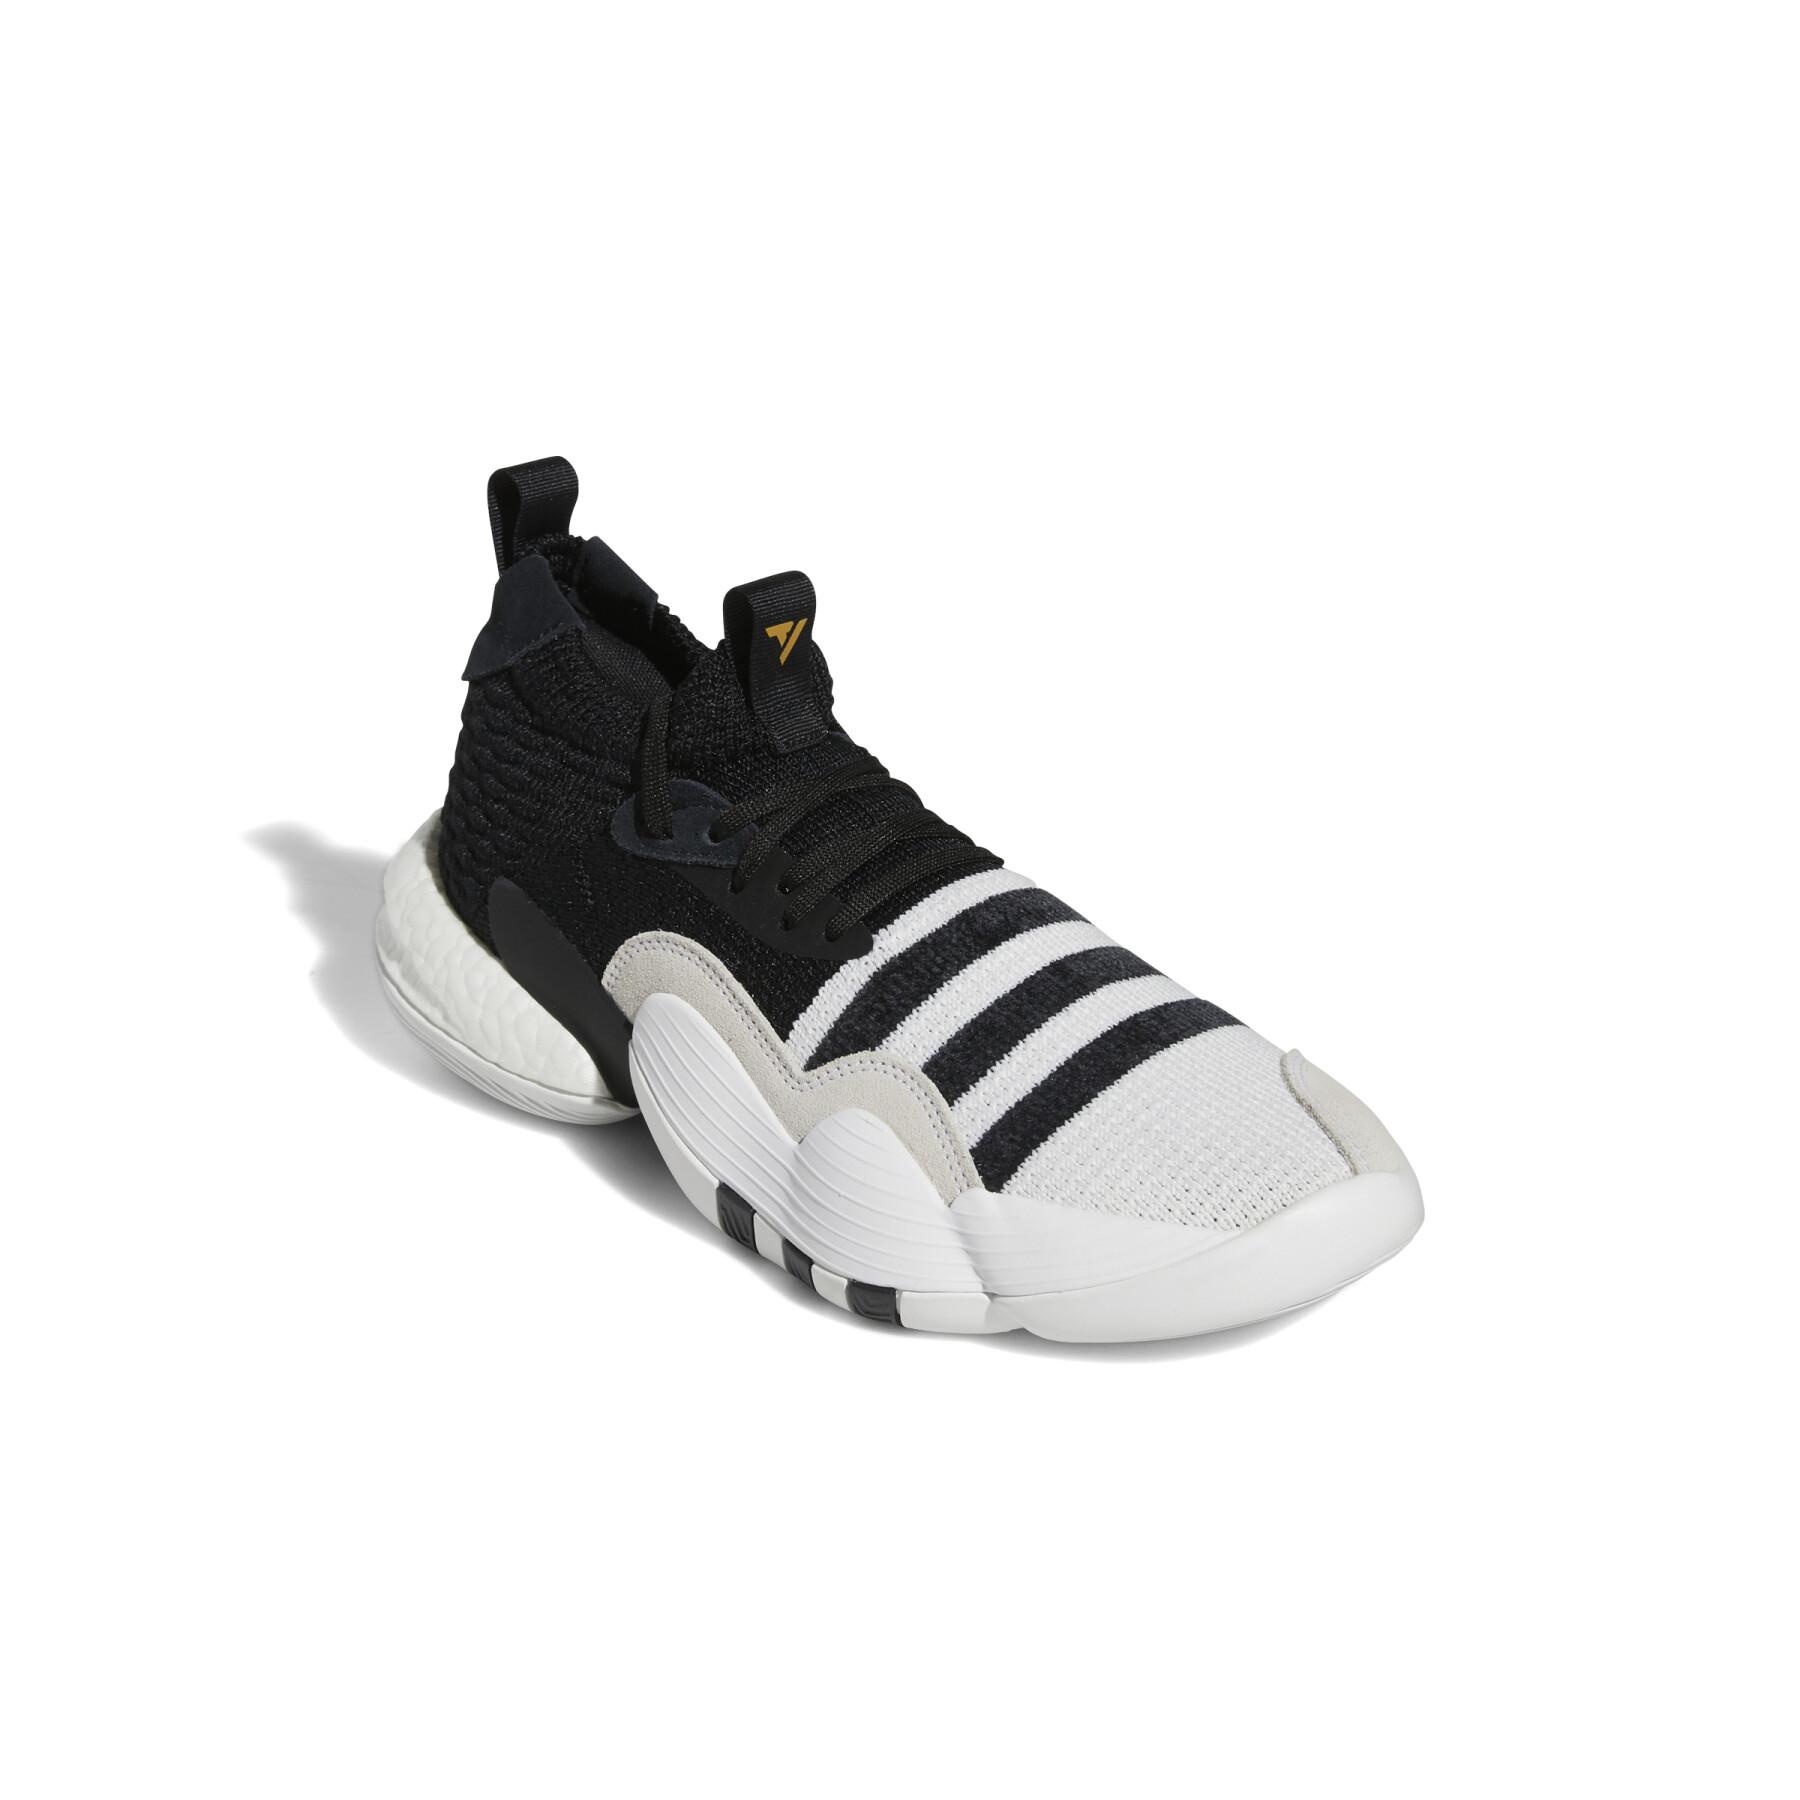 Hallenschuhe adidas Trae Young 2.0